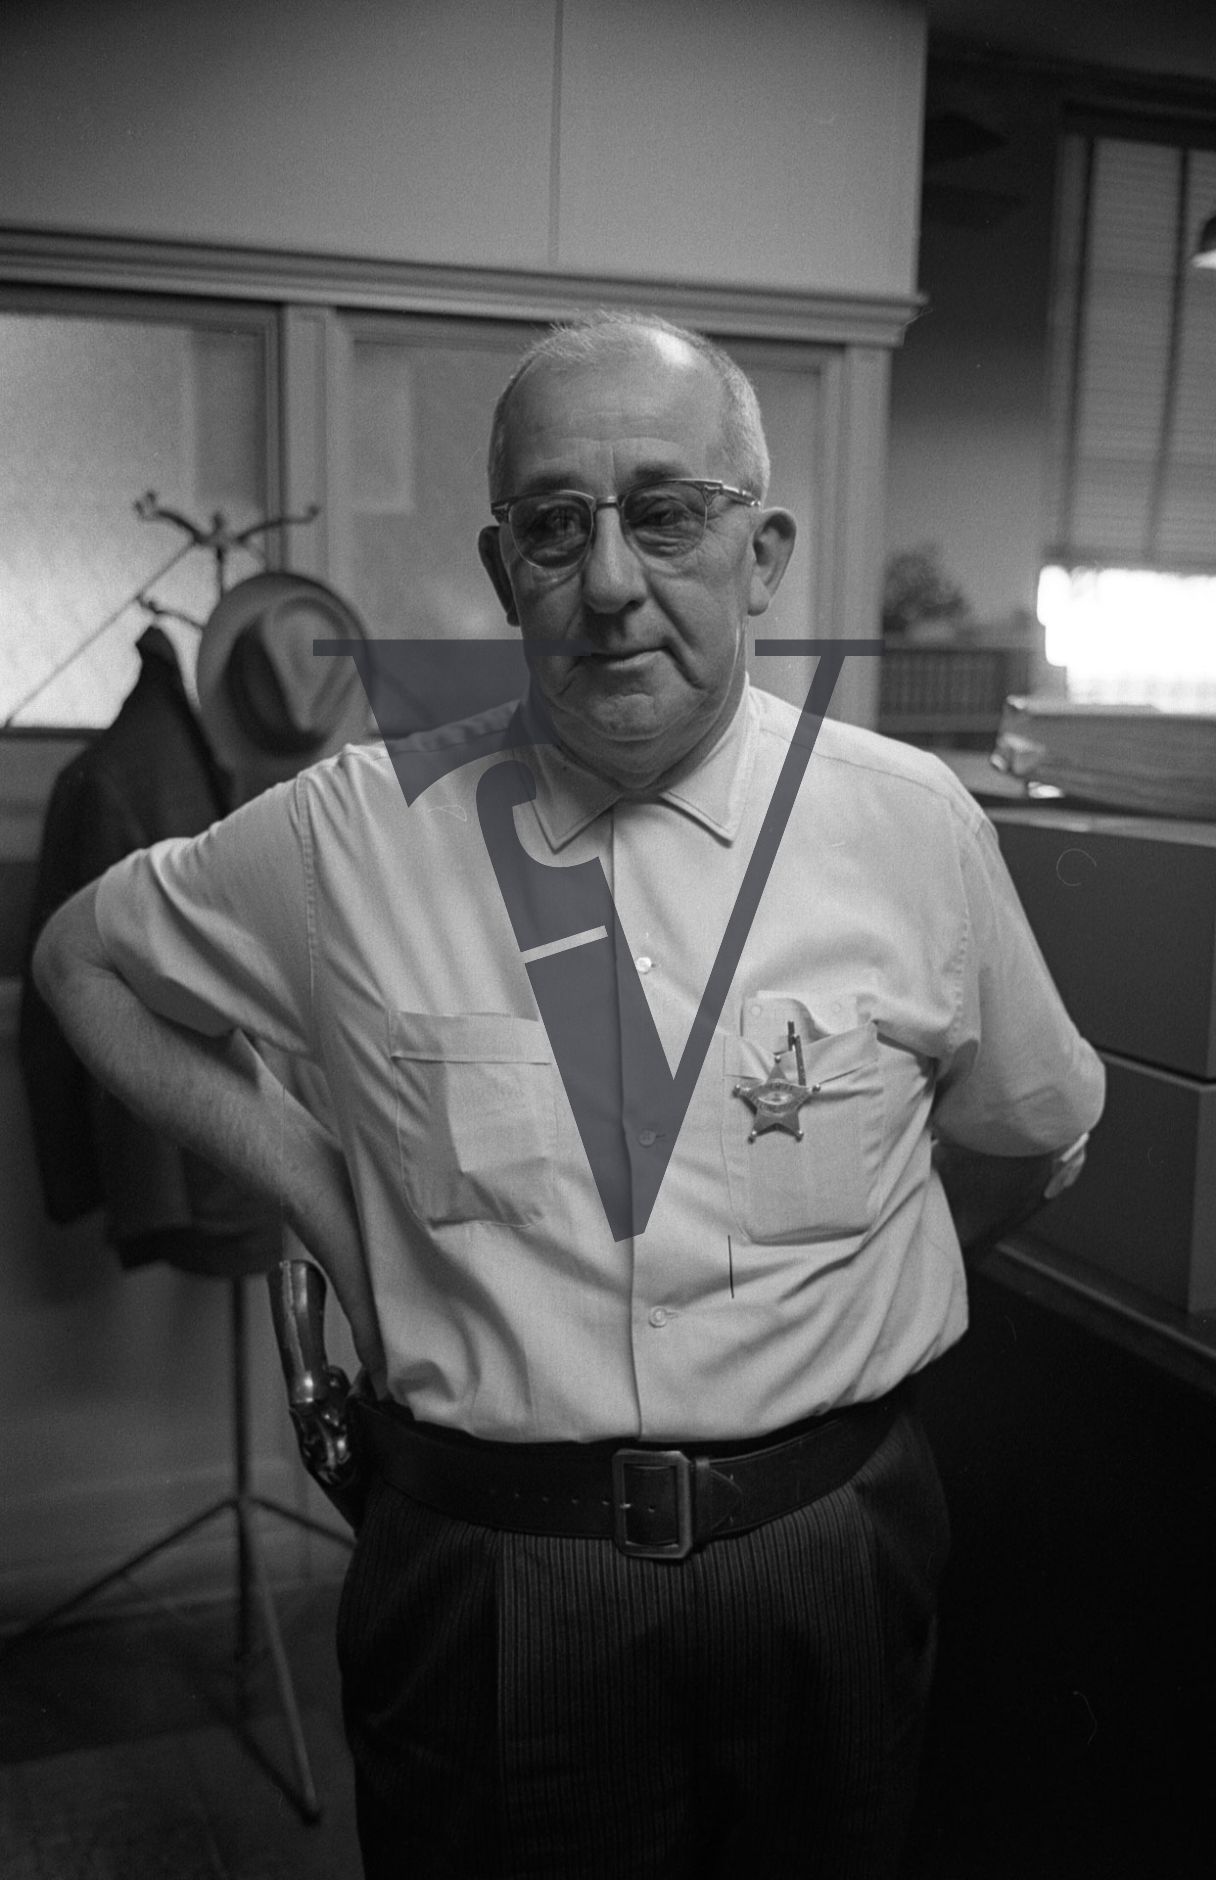 Leflore County Sheriff George Smith, portrait, gun and badge.